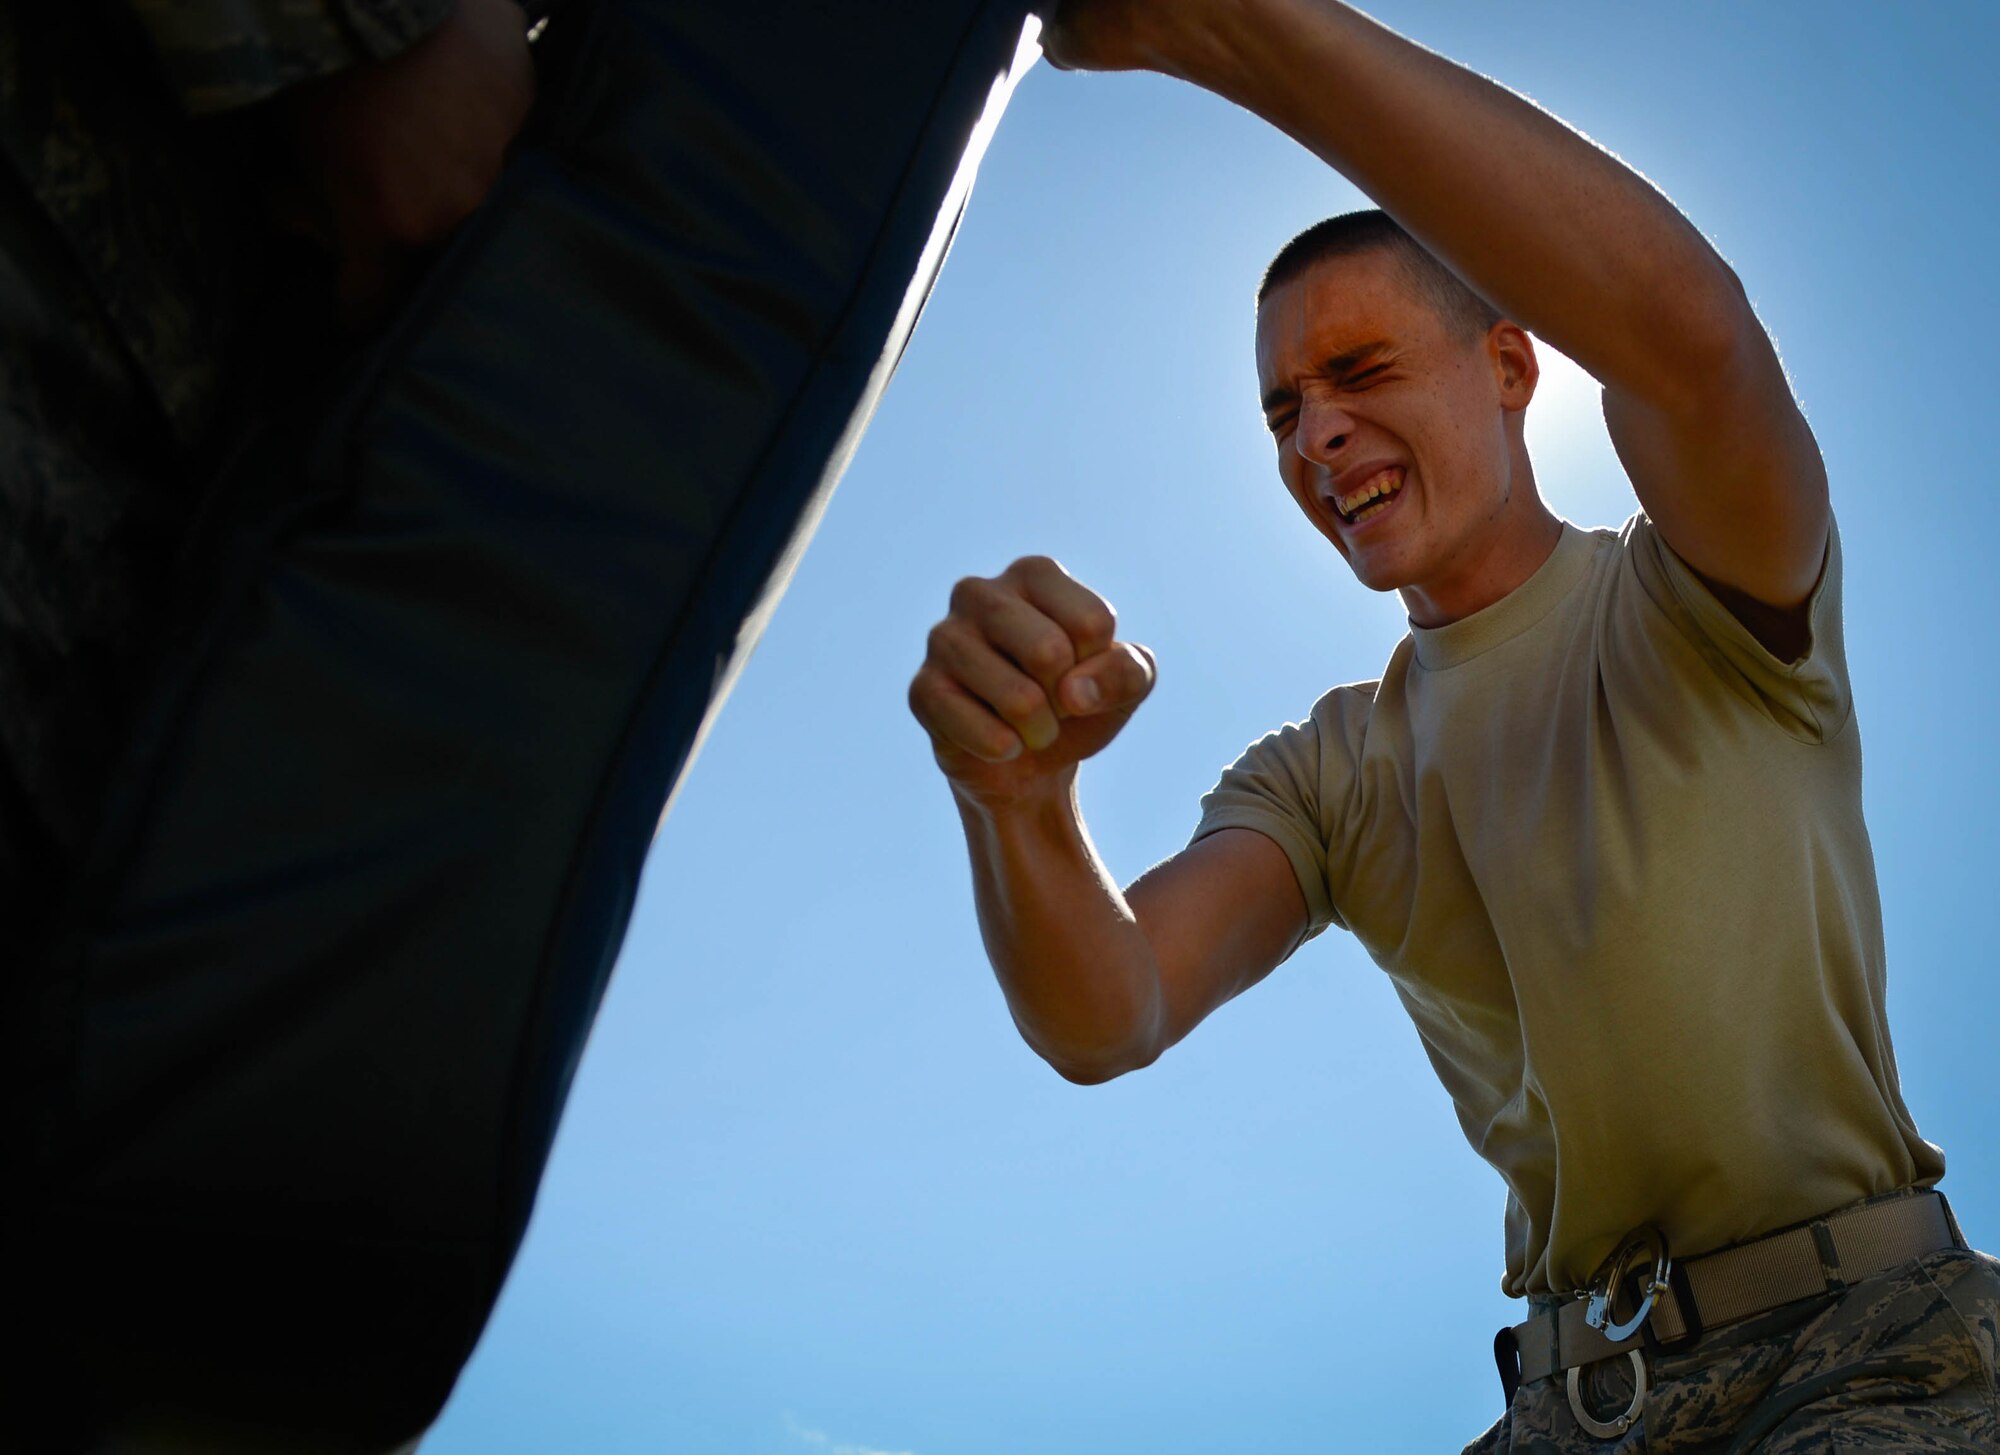 U.S. Air Force Airman Zachary Russel, 20th Security Forces Squadron journeyman, punches a simulated perpetrator after exposure to pepper spray during training at Shaw Air Force Base, S.C., Feb. 29, 2016. The training prepares 20th SFS Airmen on the actions to take if pepper sprayed. (U.S. Air Force photo by Senior Airman Jensen Stidham)